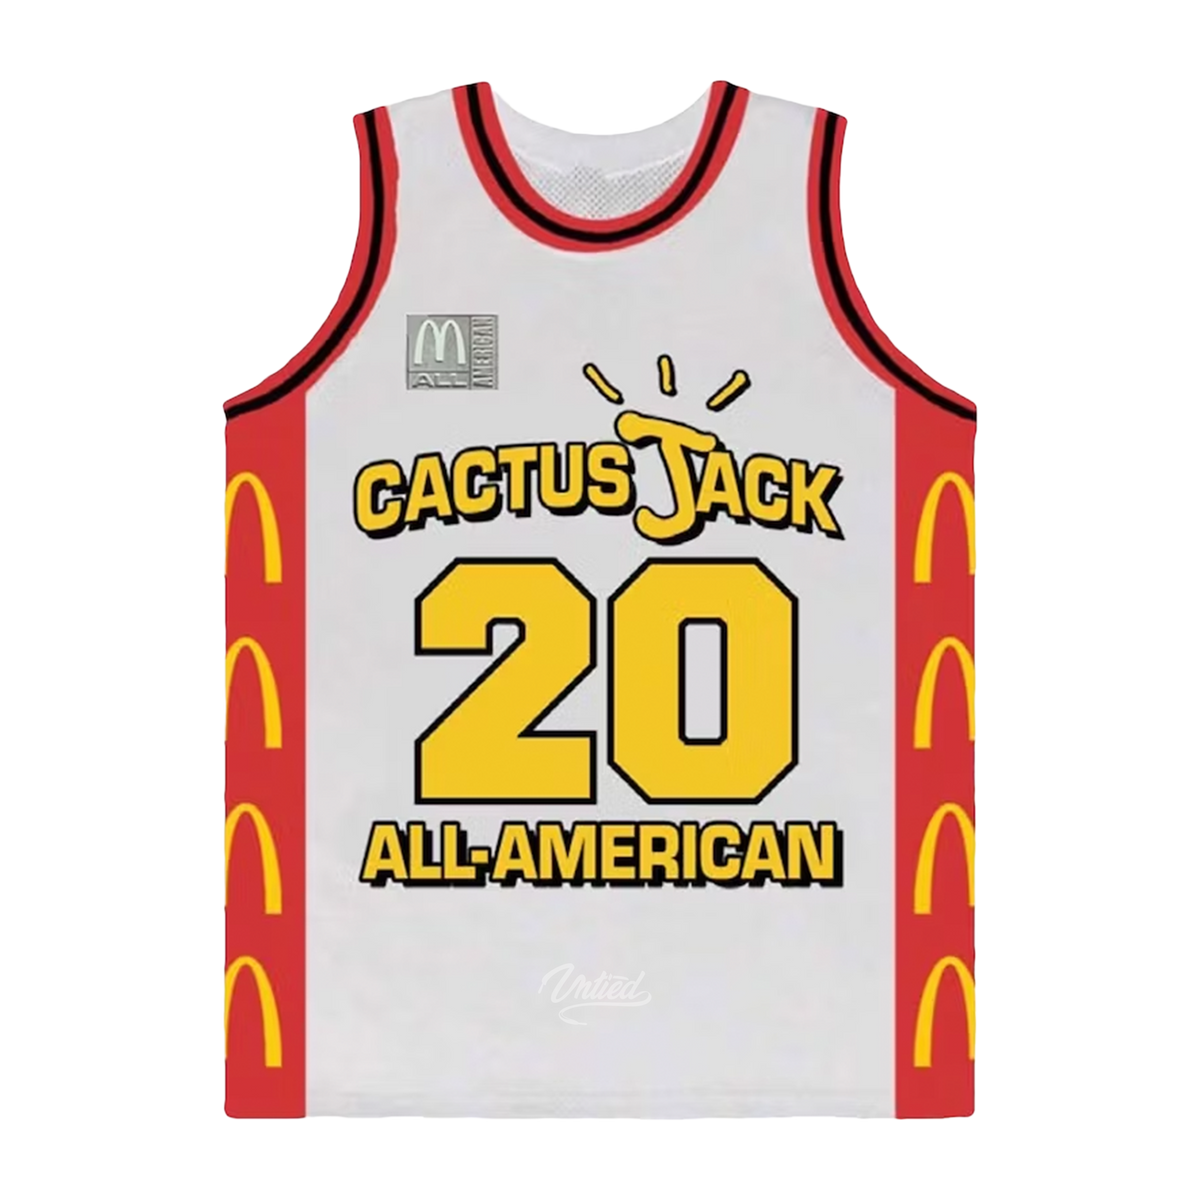 Cactus Jack Jersey "All American"